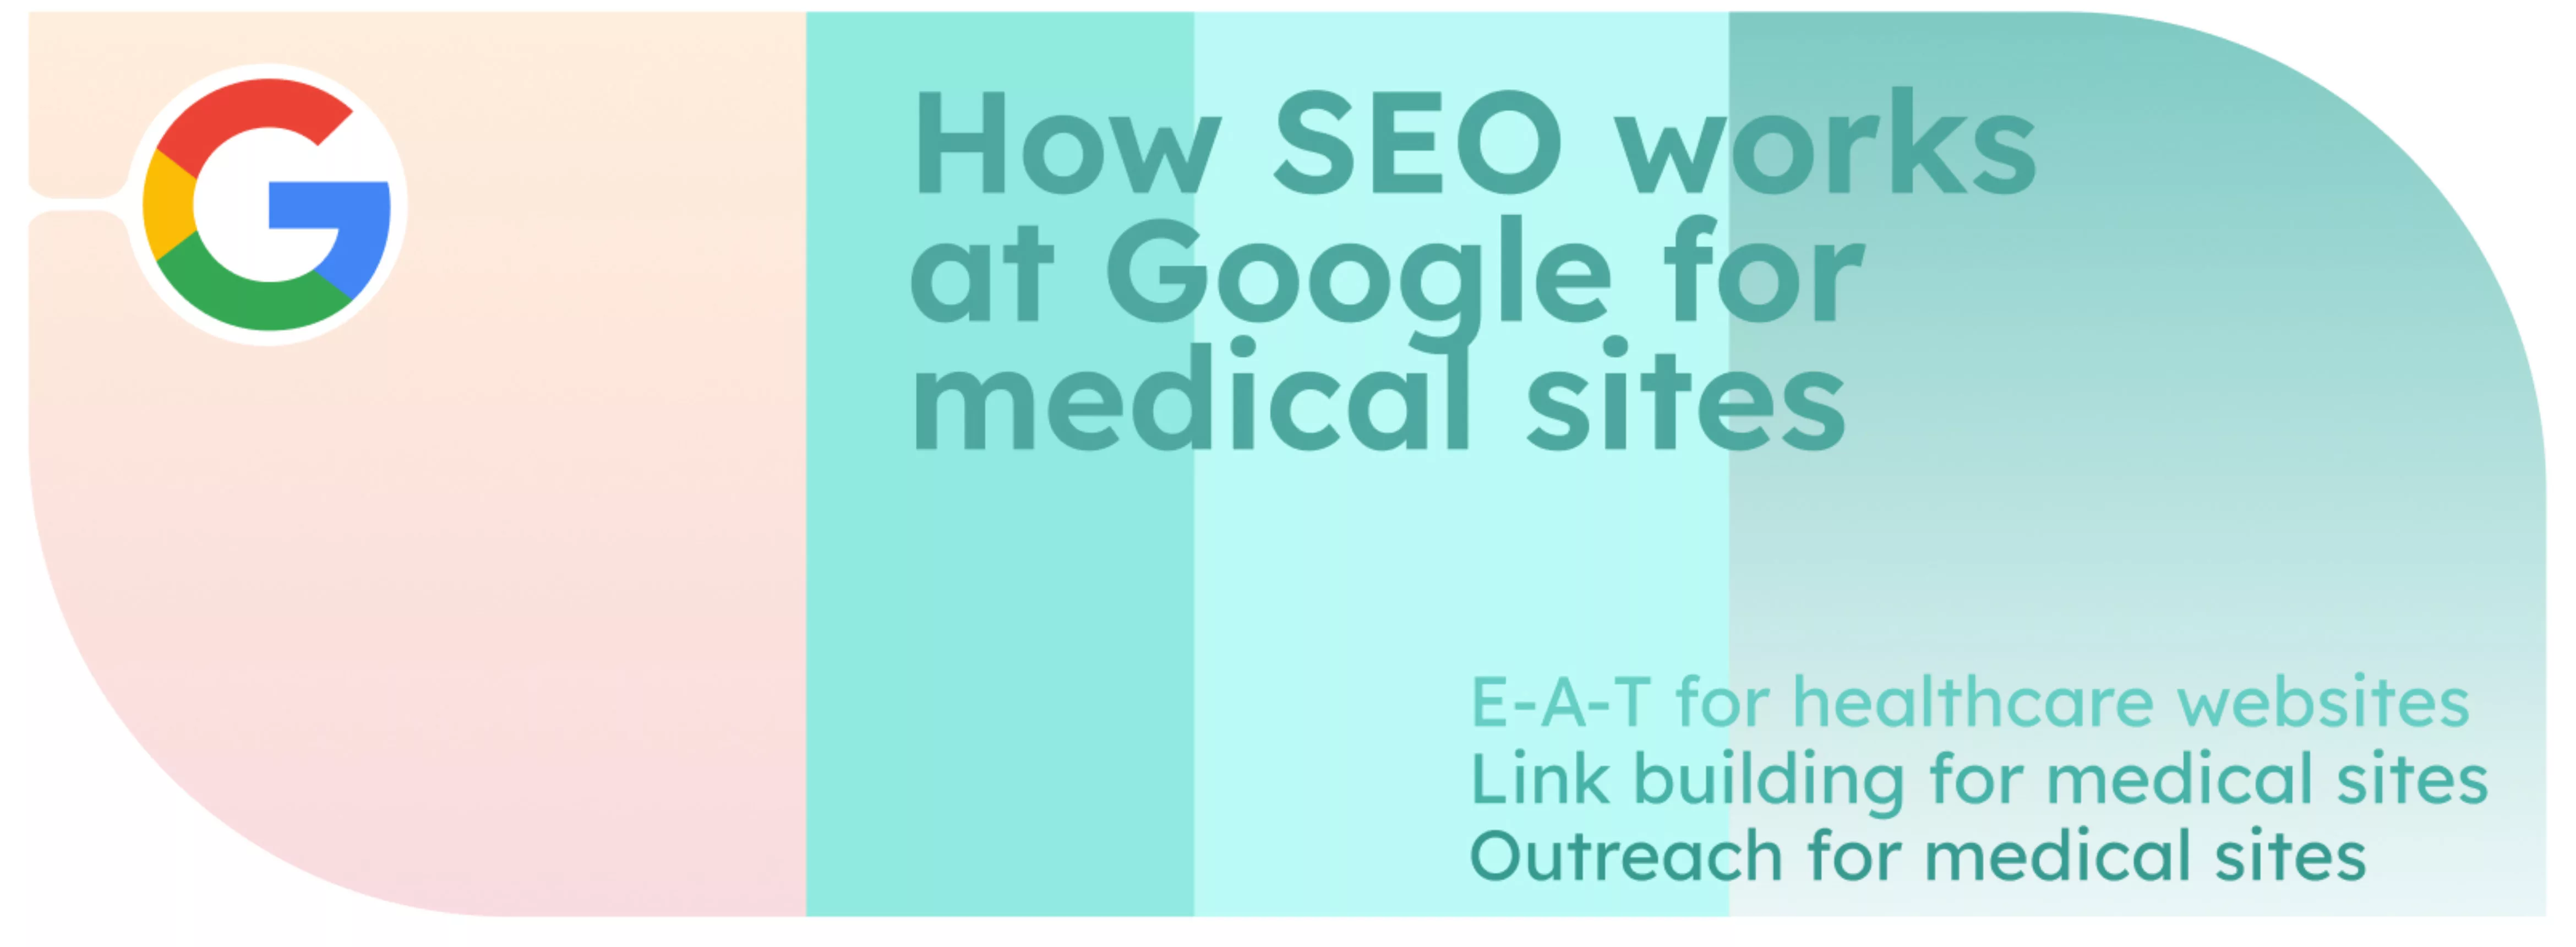 How SEO works at Google for medical sites